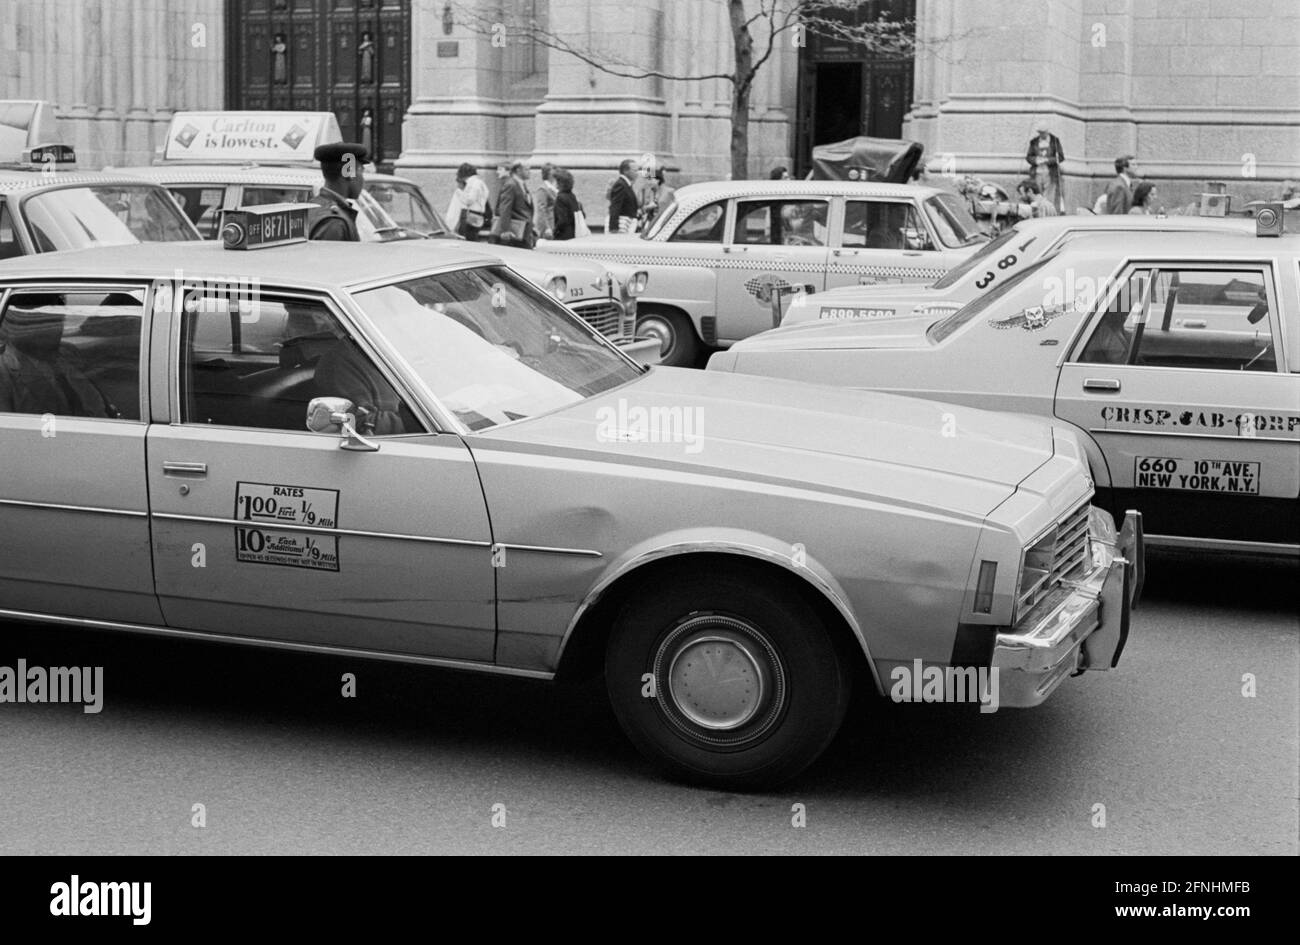 New York City Photo Essay, April 30, 1981- Yellow cabs jam 5th Avenue. St. Patrick's Cathedral in the background. Stock Photo